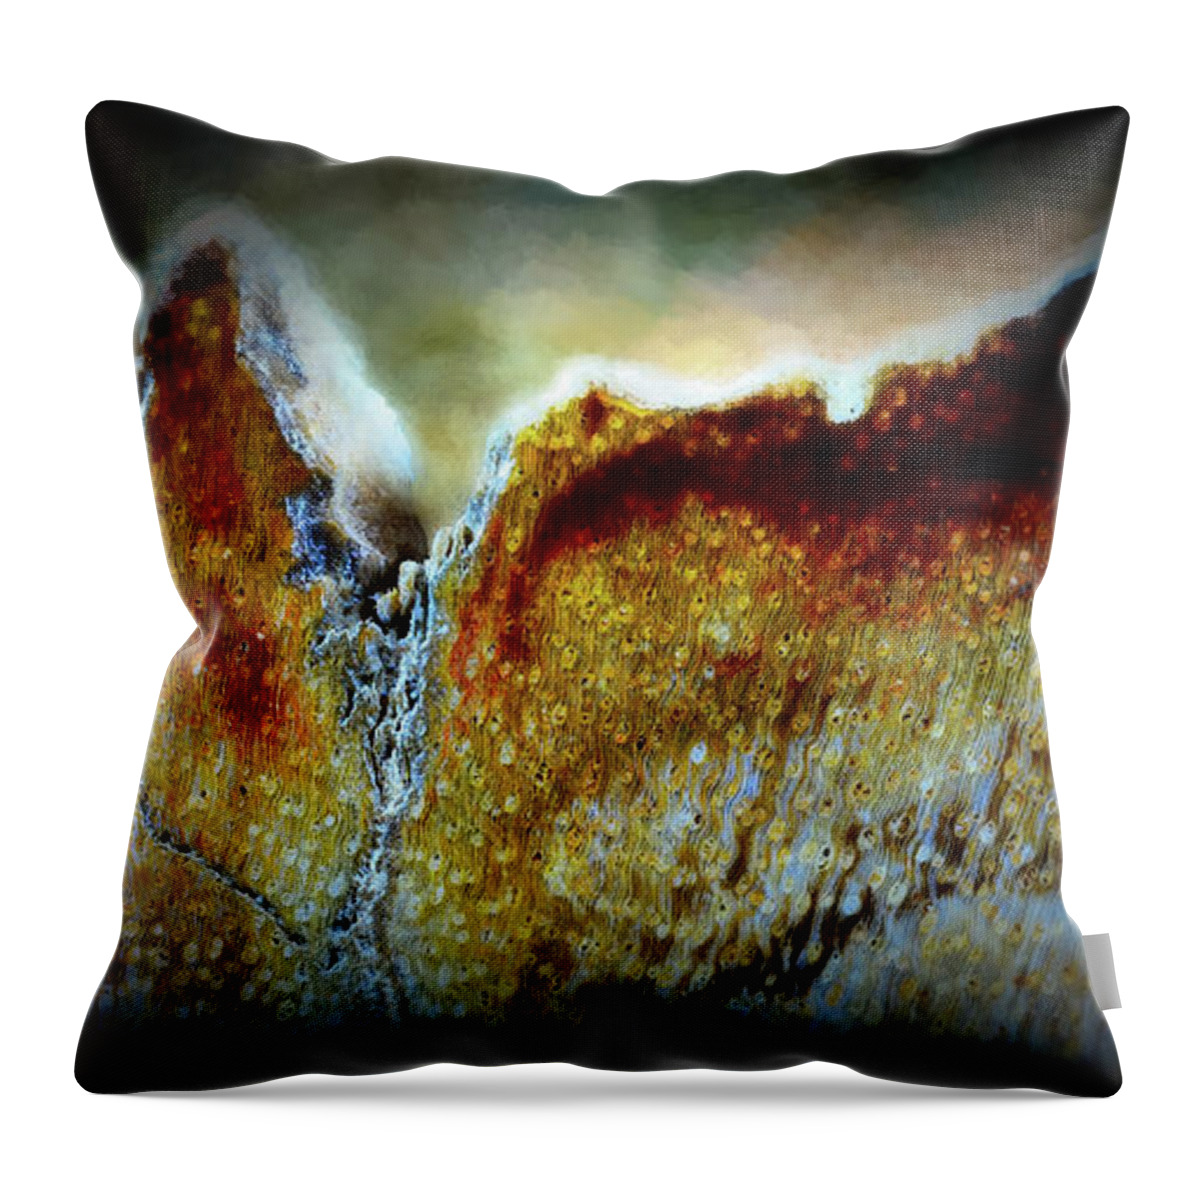 Fine Art Photography Throw Pillow featuring the photograph Redhorn Gate by John Strong